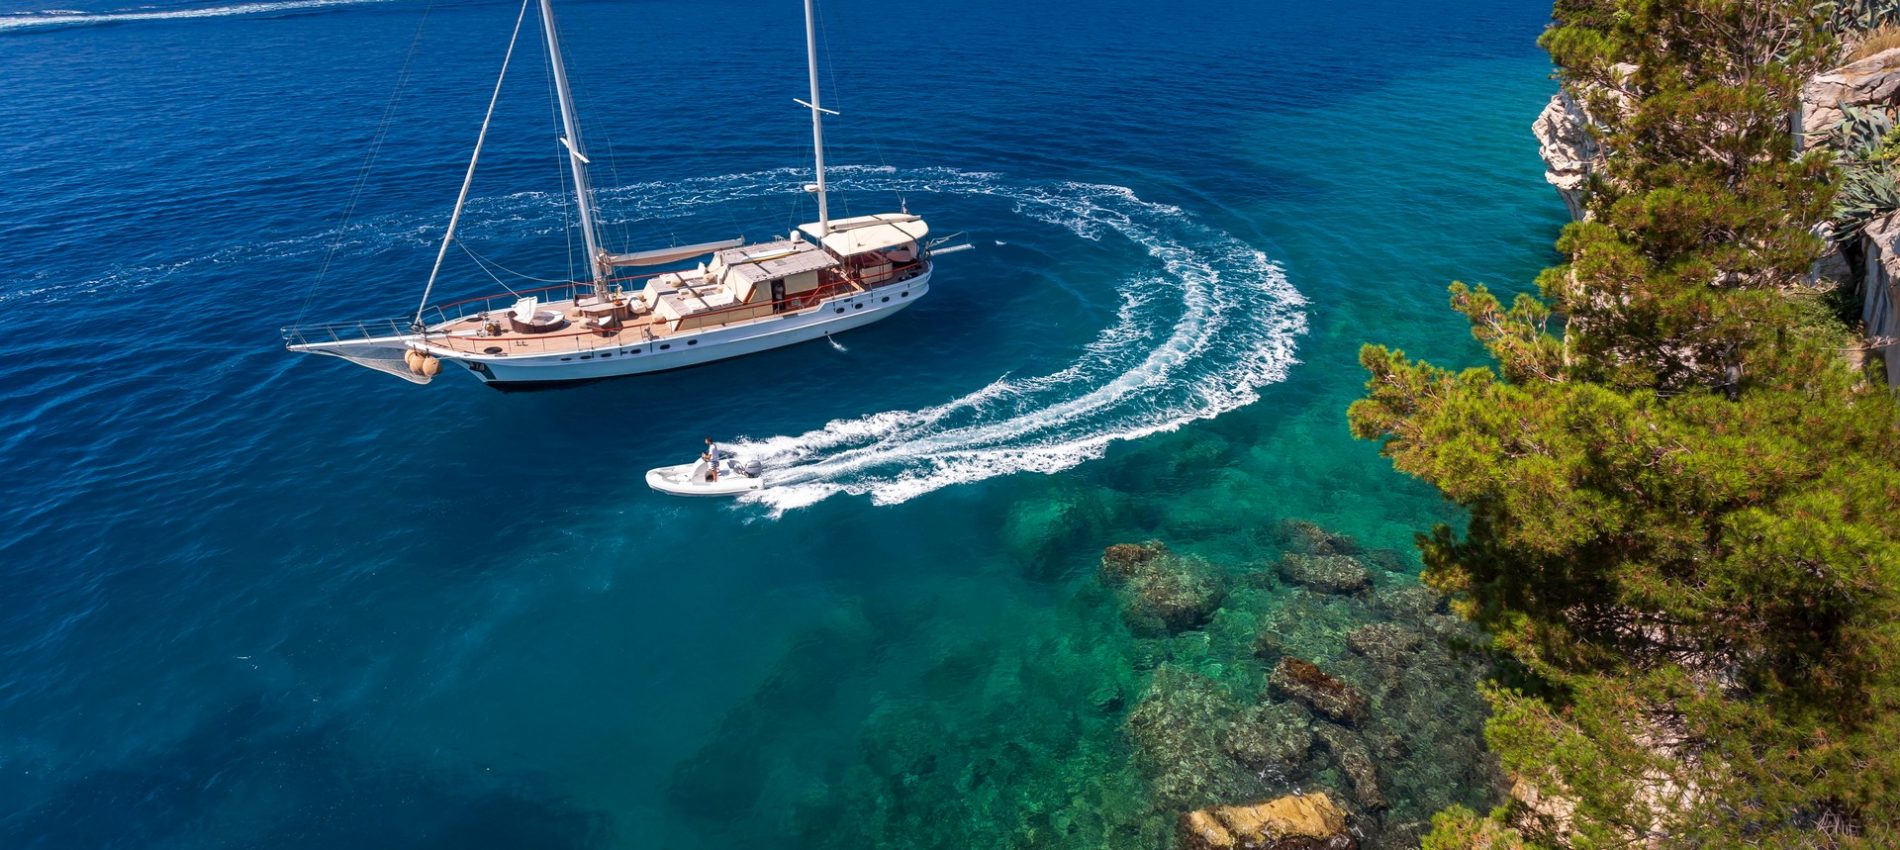 Orvas Yachting proudly announces central agency of gulets San and Summer Princess